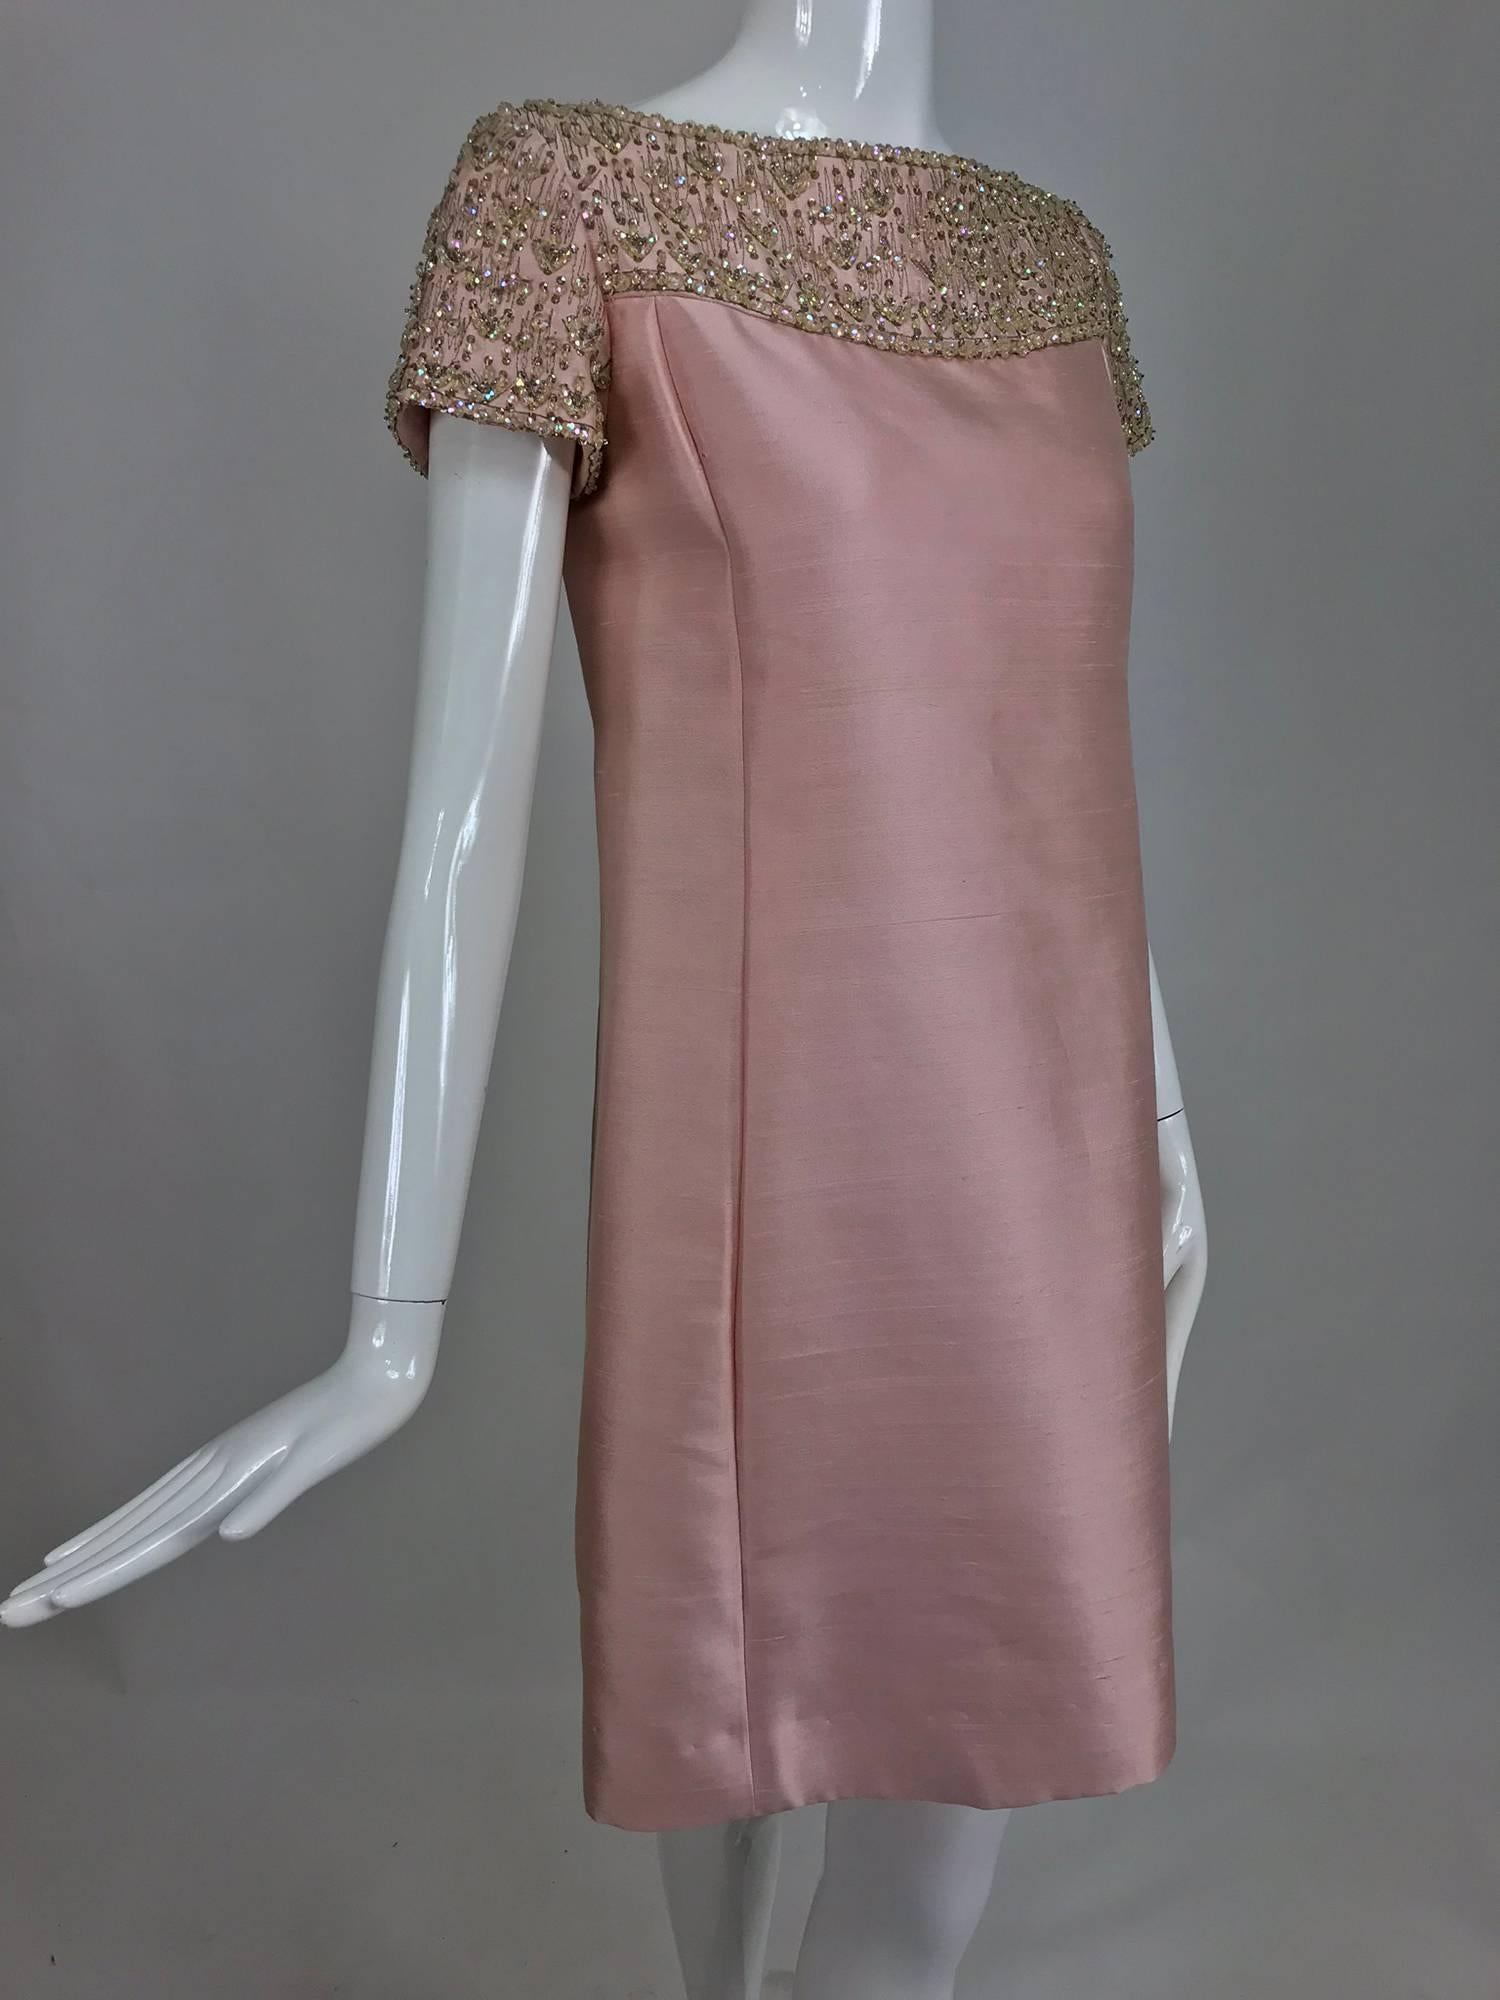 Vintage Malcolm Starr classic beaded pink silk princess seam cocktail dress from the early 1960s...A style regularity worn by Audrey Hepburn and Jackie Kennedy classic and elegant...Bateau neckline dress with upper bodice and cap sleeves covered in